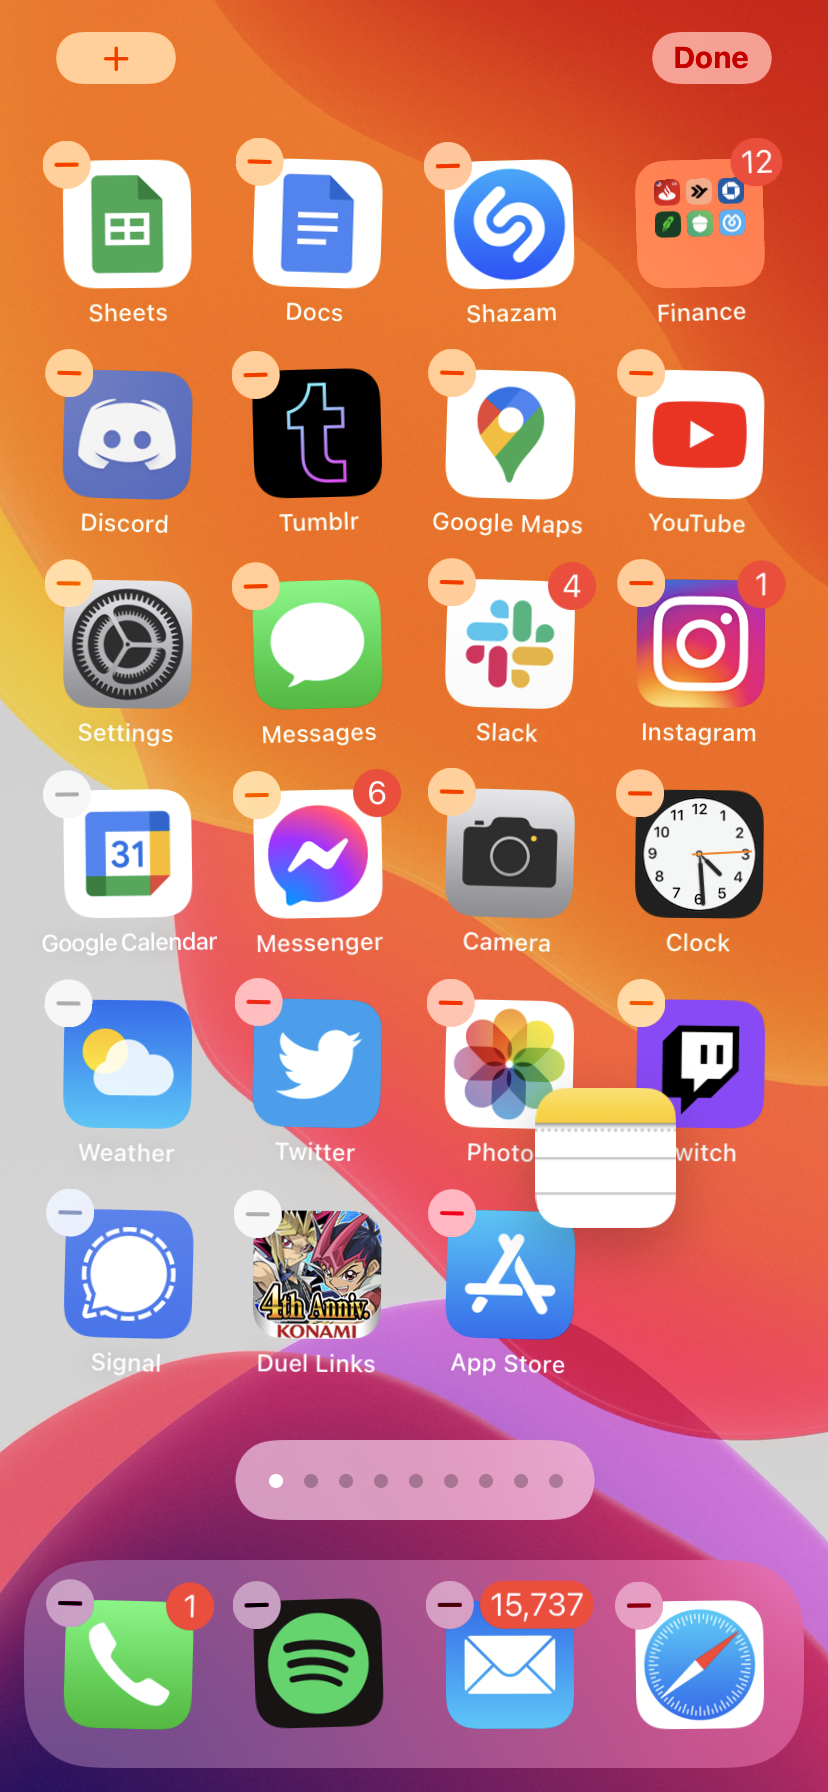 How to organize apps on your iPhone by moving and grouping them into